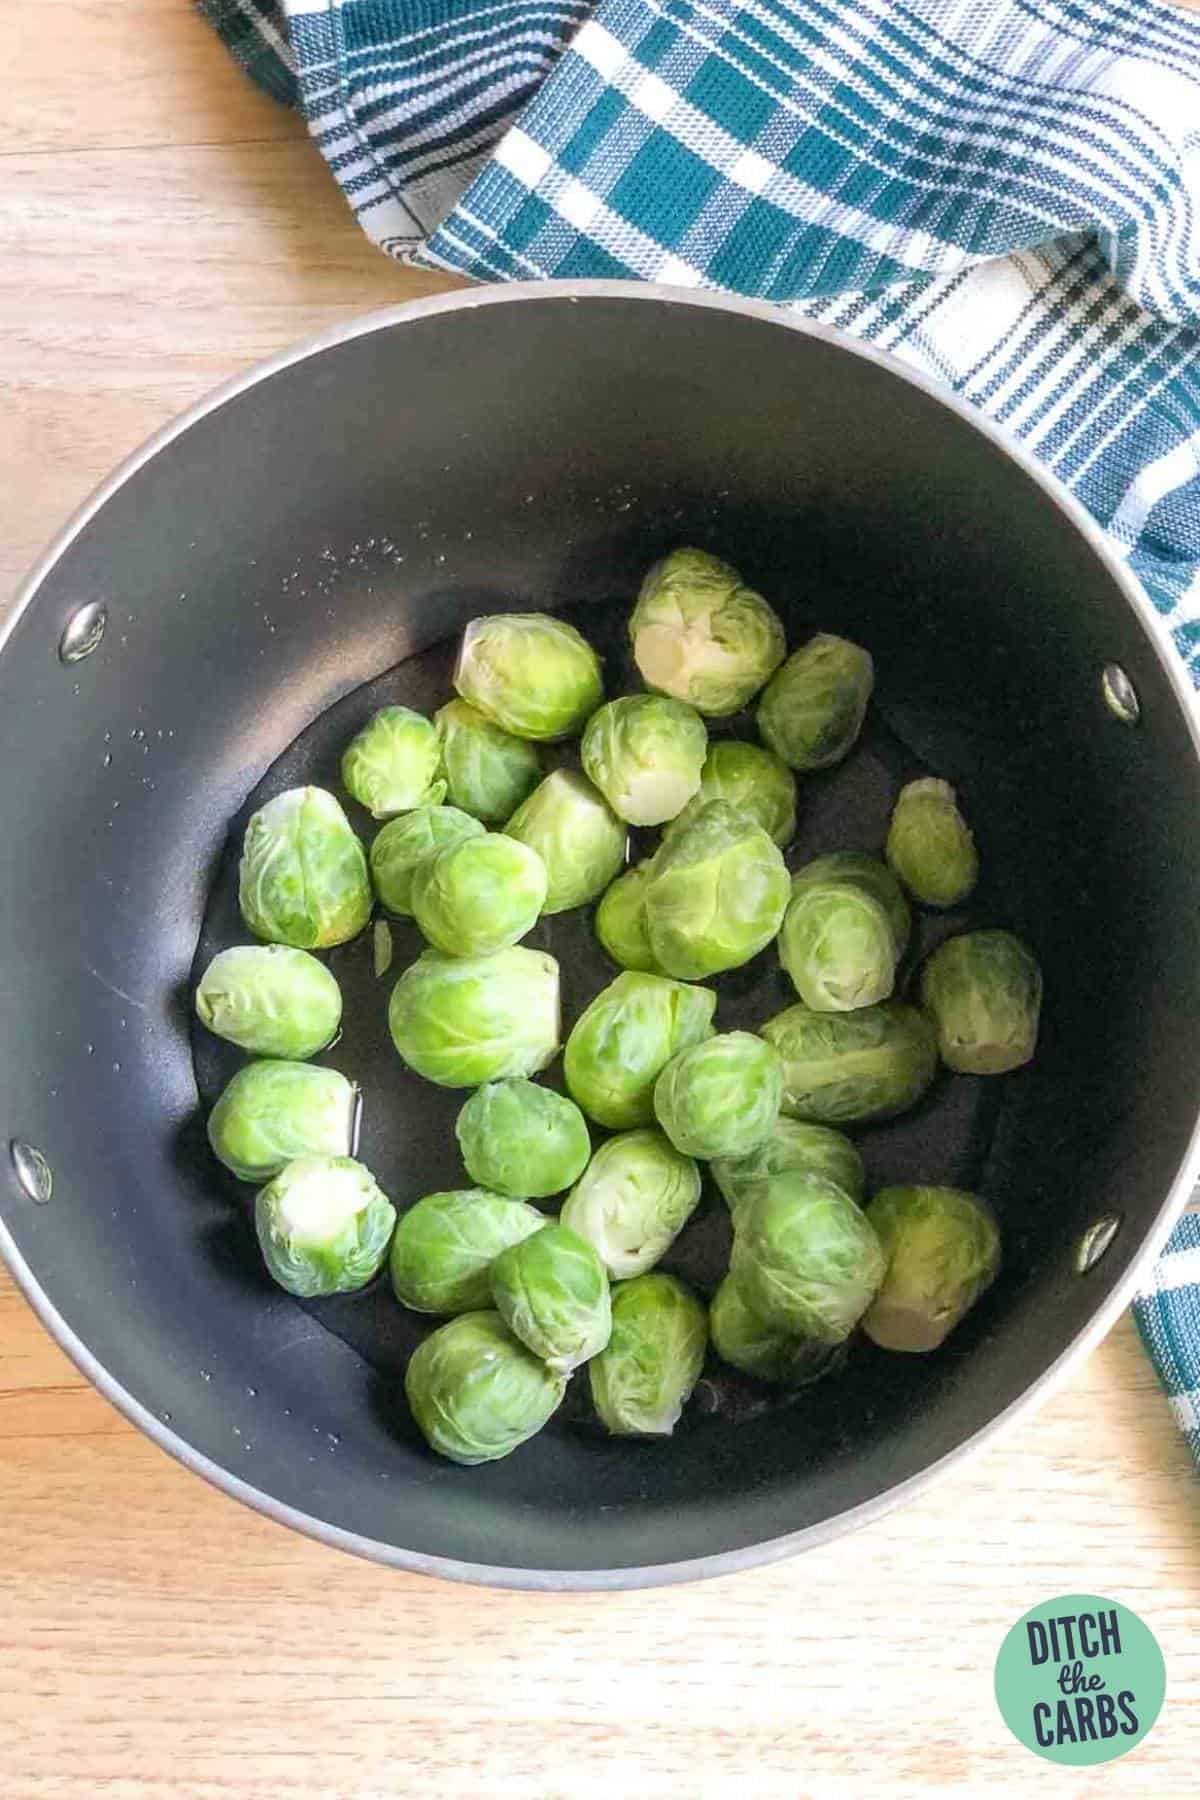 Brussels sprouts cooking in a saucepan